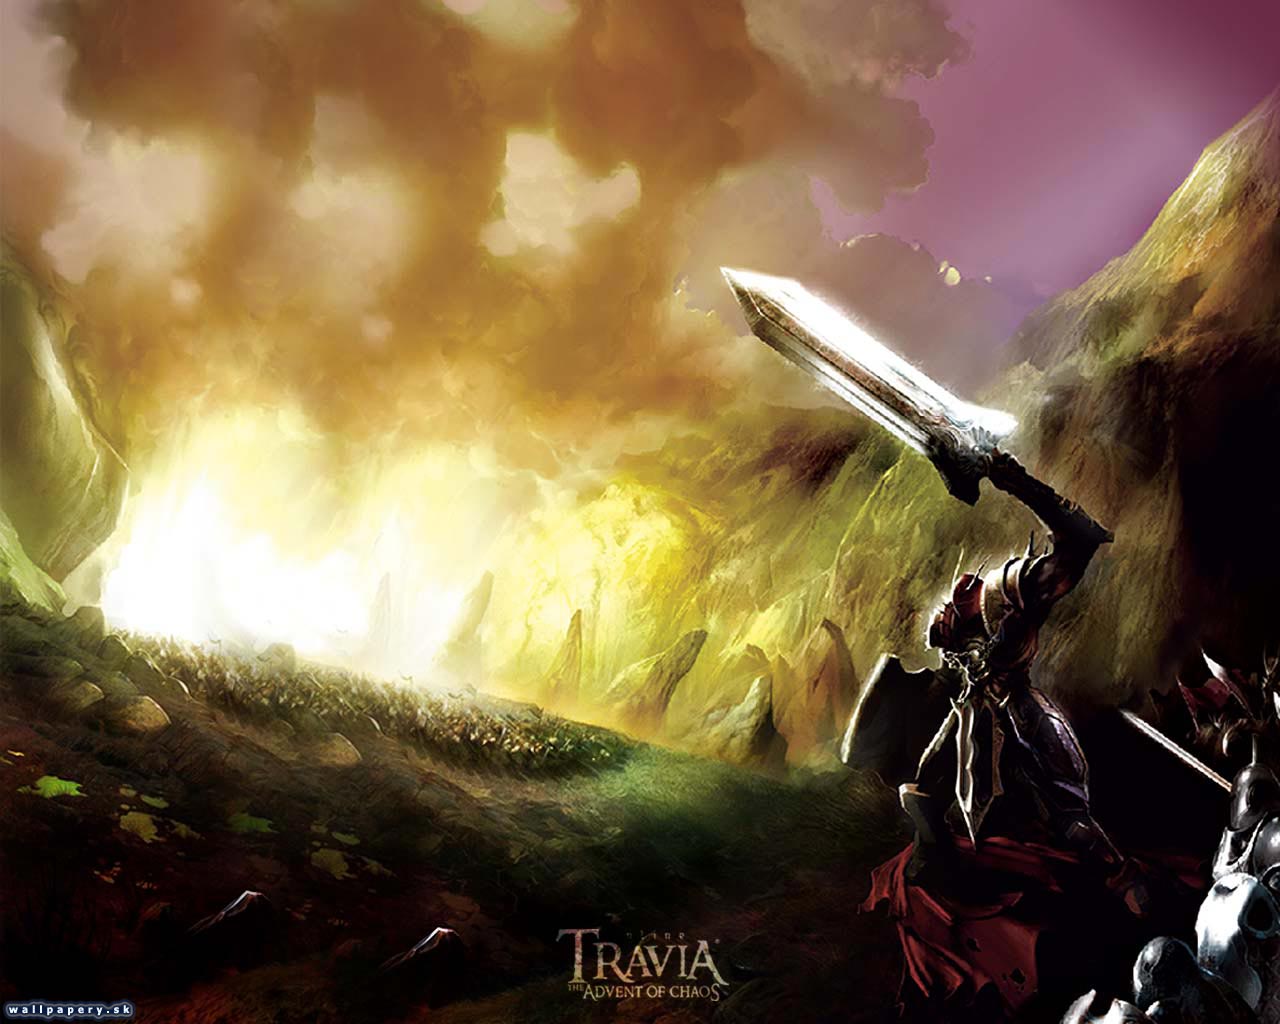 Travia Online: The Advent of Chaos - wallpaper 4